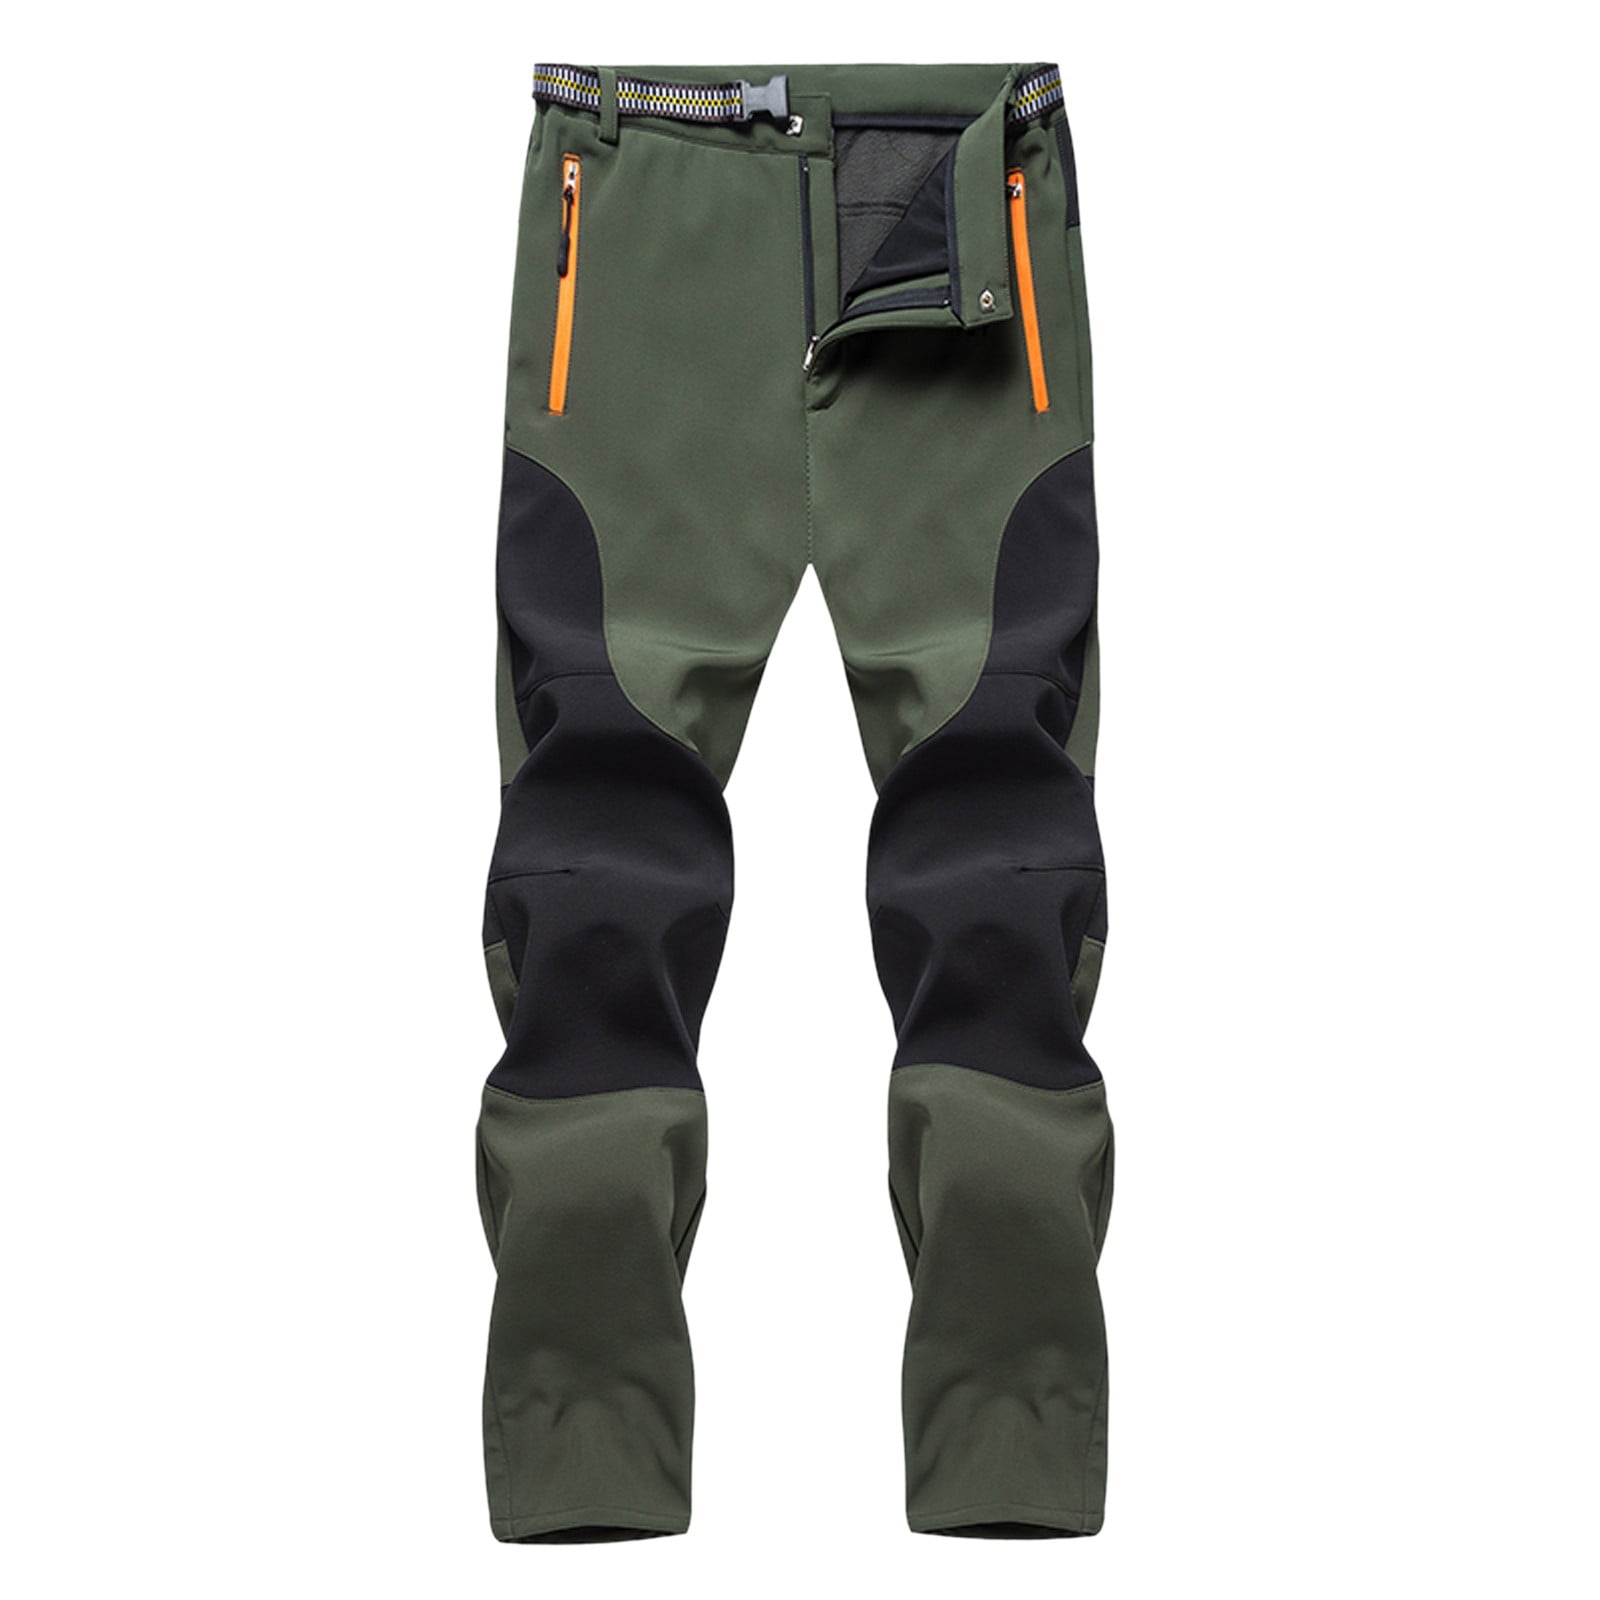 Fleece Hiking Pants for Men, Warm Softshell Trousers, Outdoor